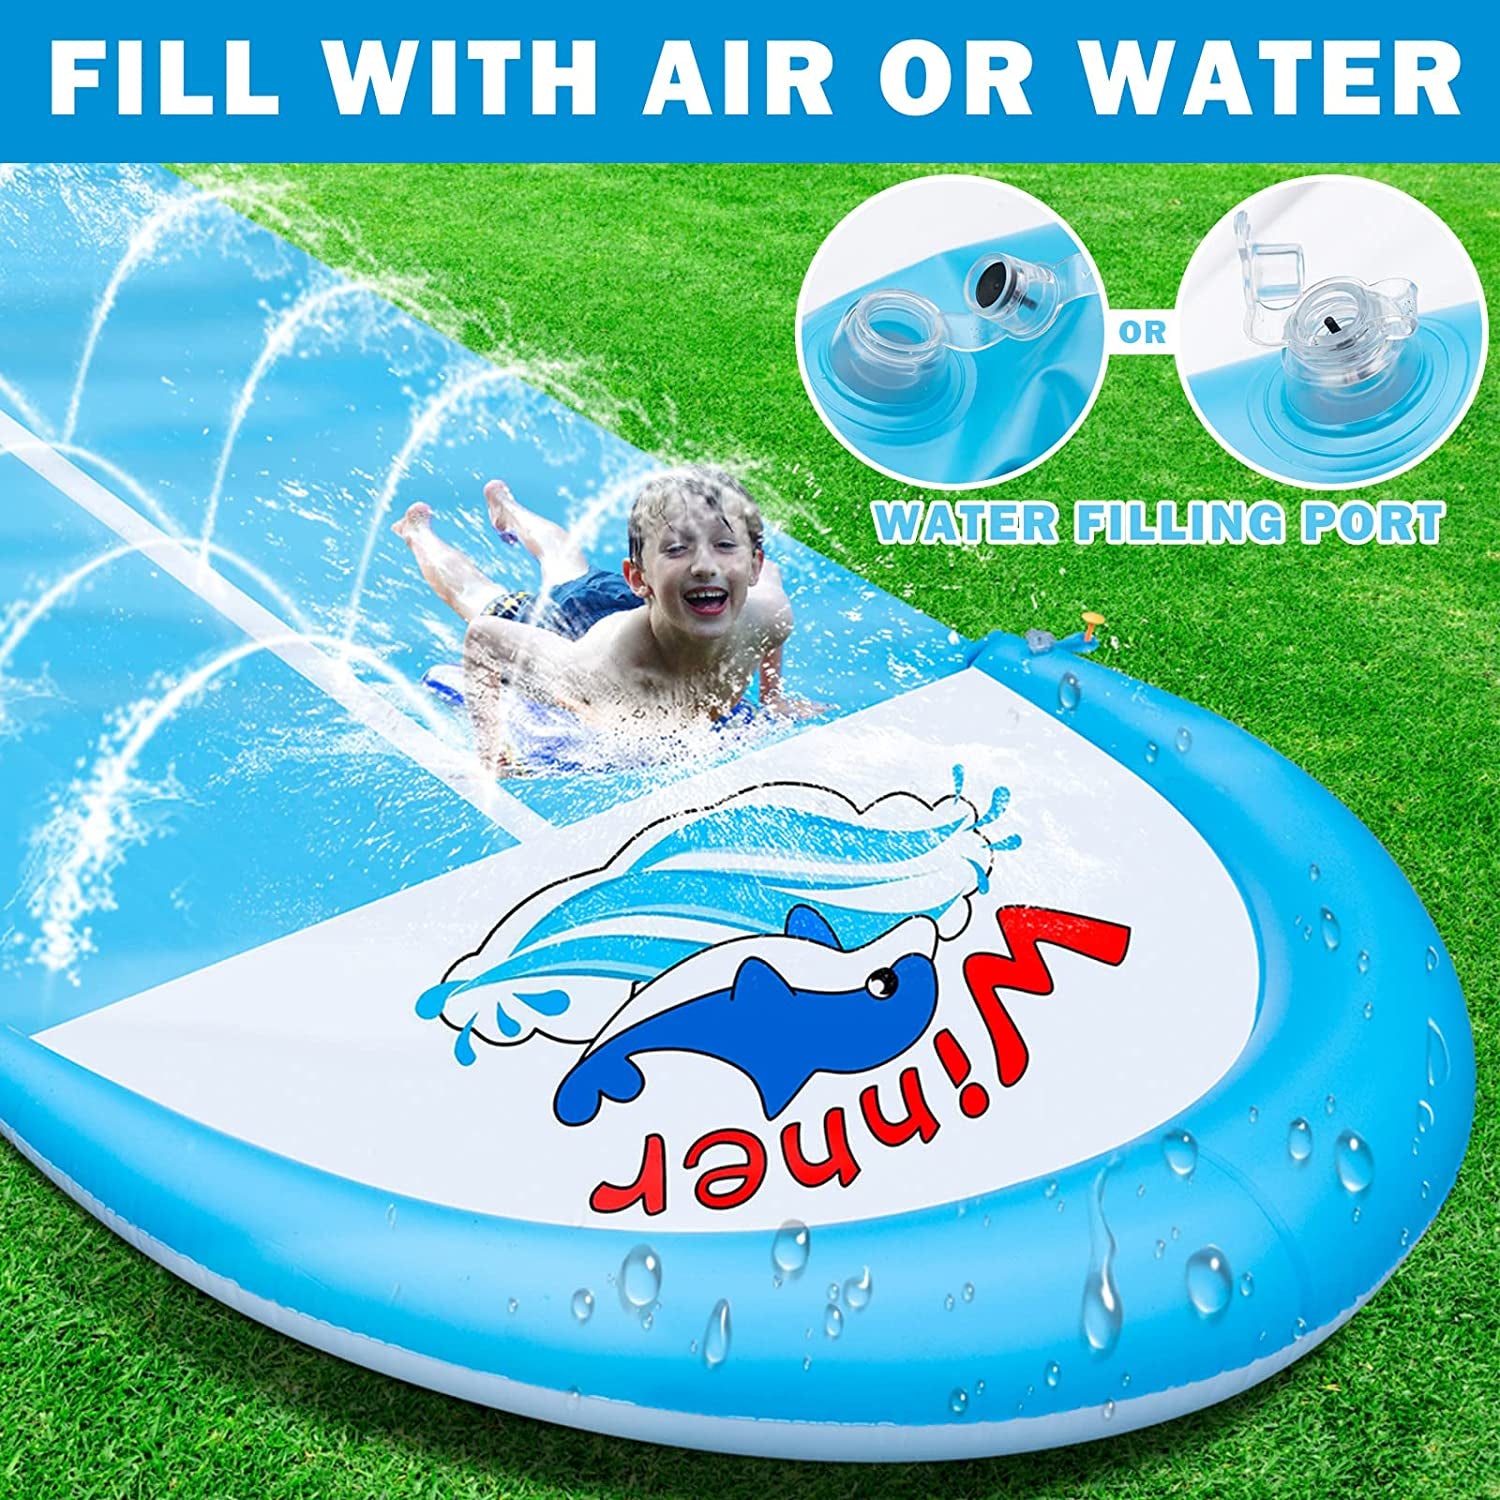 30Ft Slip Splash and Slide, Heavy Duty Lawn Water Slide, Extra Long Slip Water Slides with 2 Bodyboards for Kids Adults Summer Toy with Sprinkler, Sports Outdoor Garden Backyard (A)